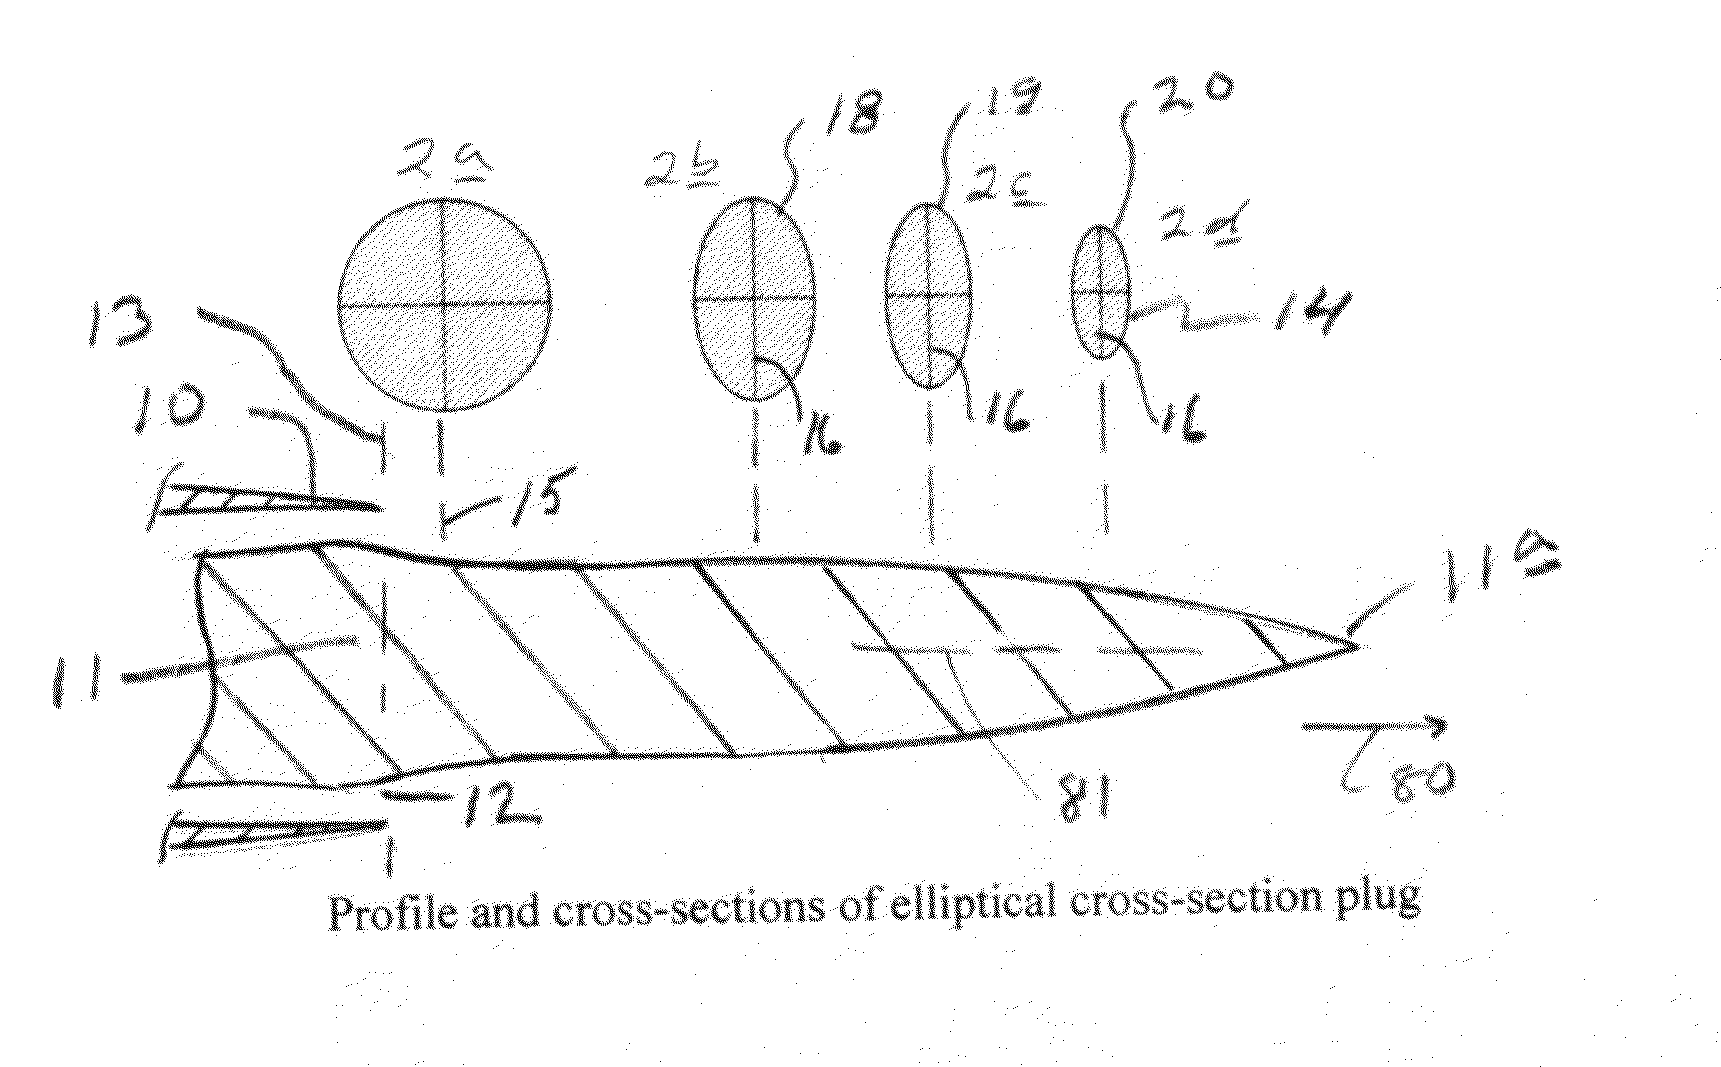 Jet nozzle plug with varying, non-circular cross sections